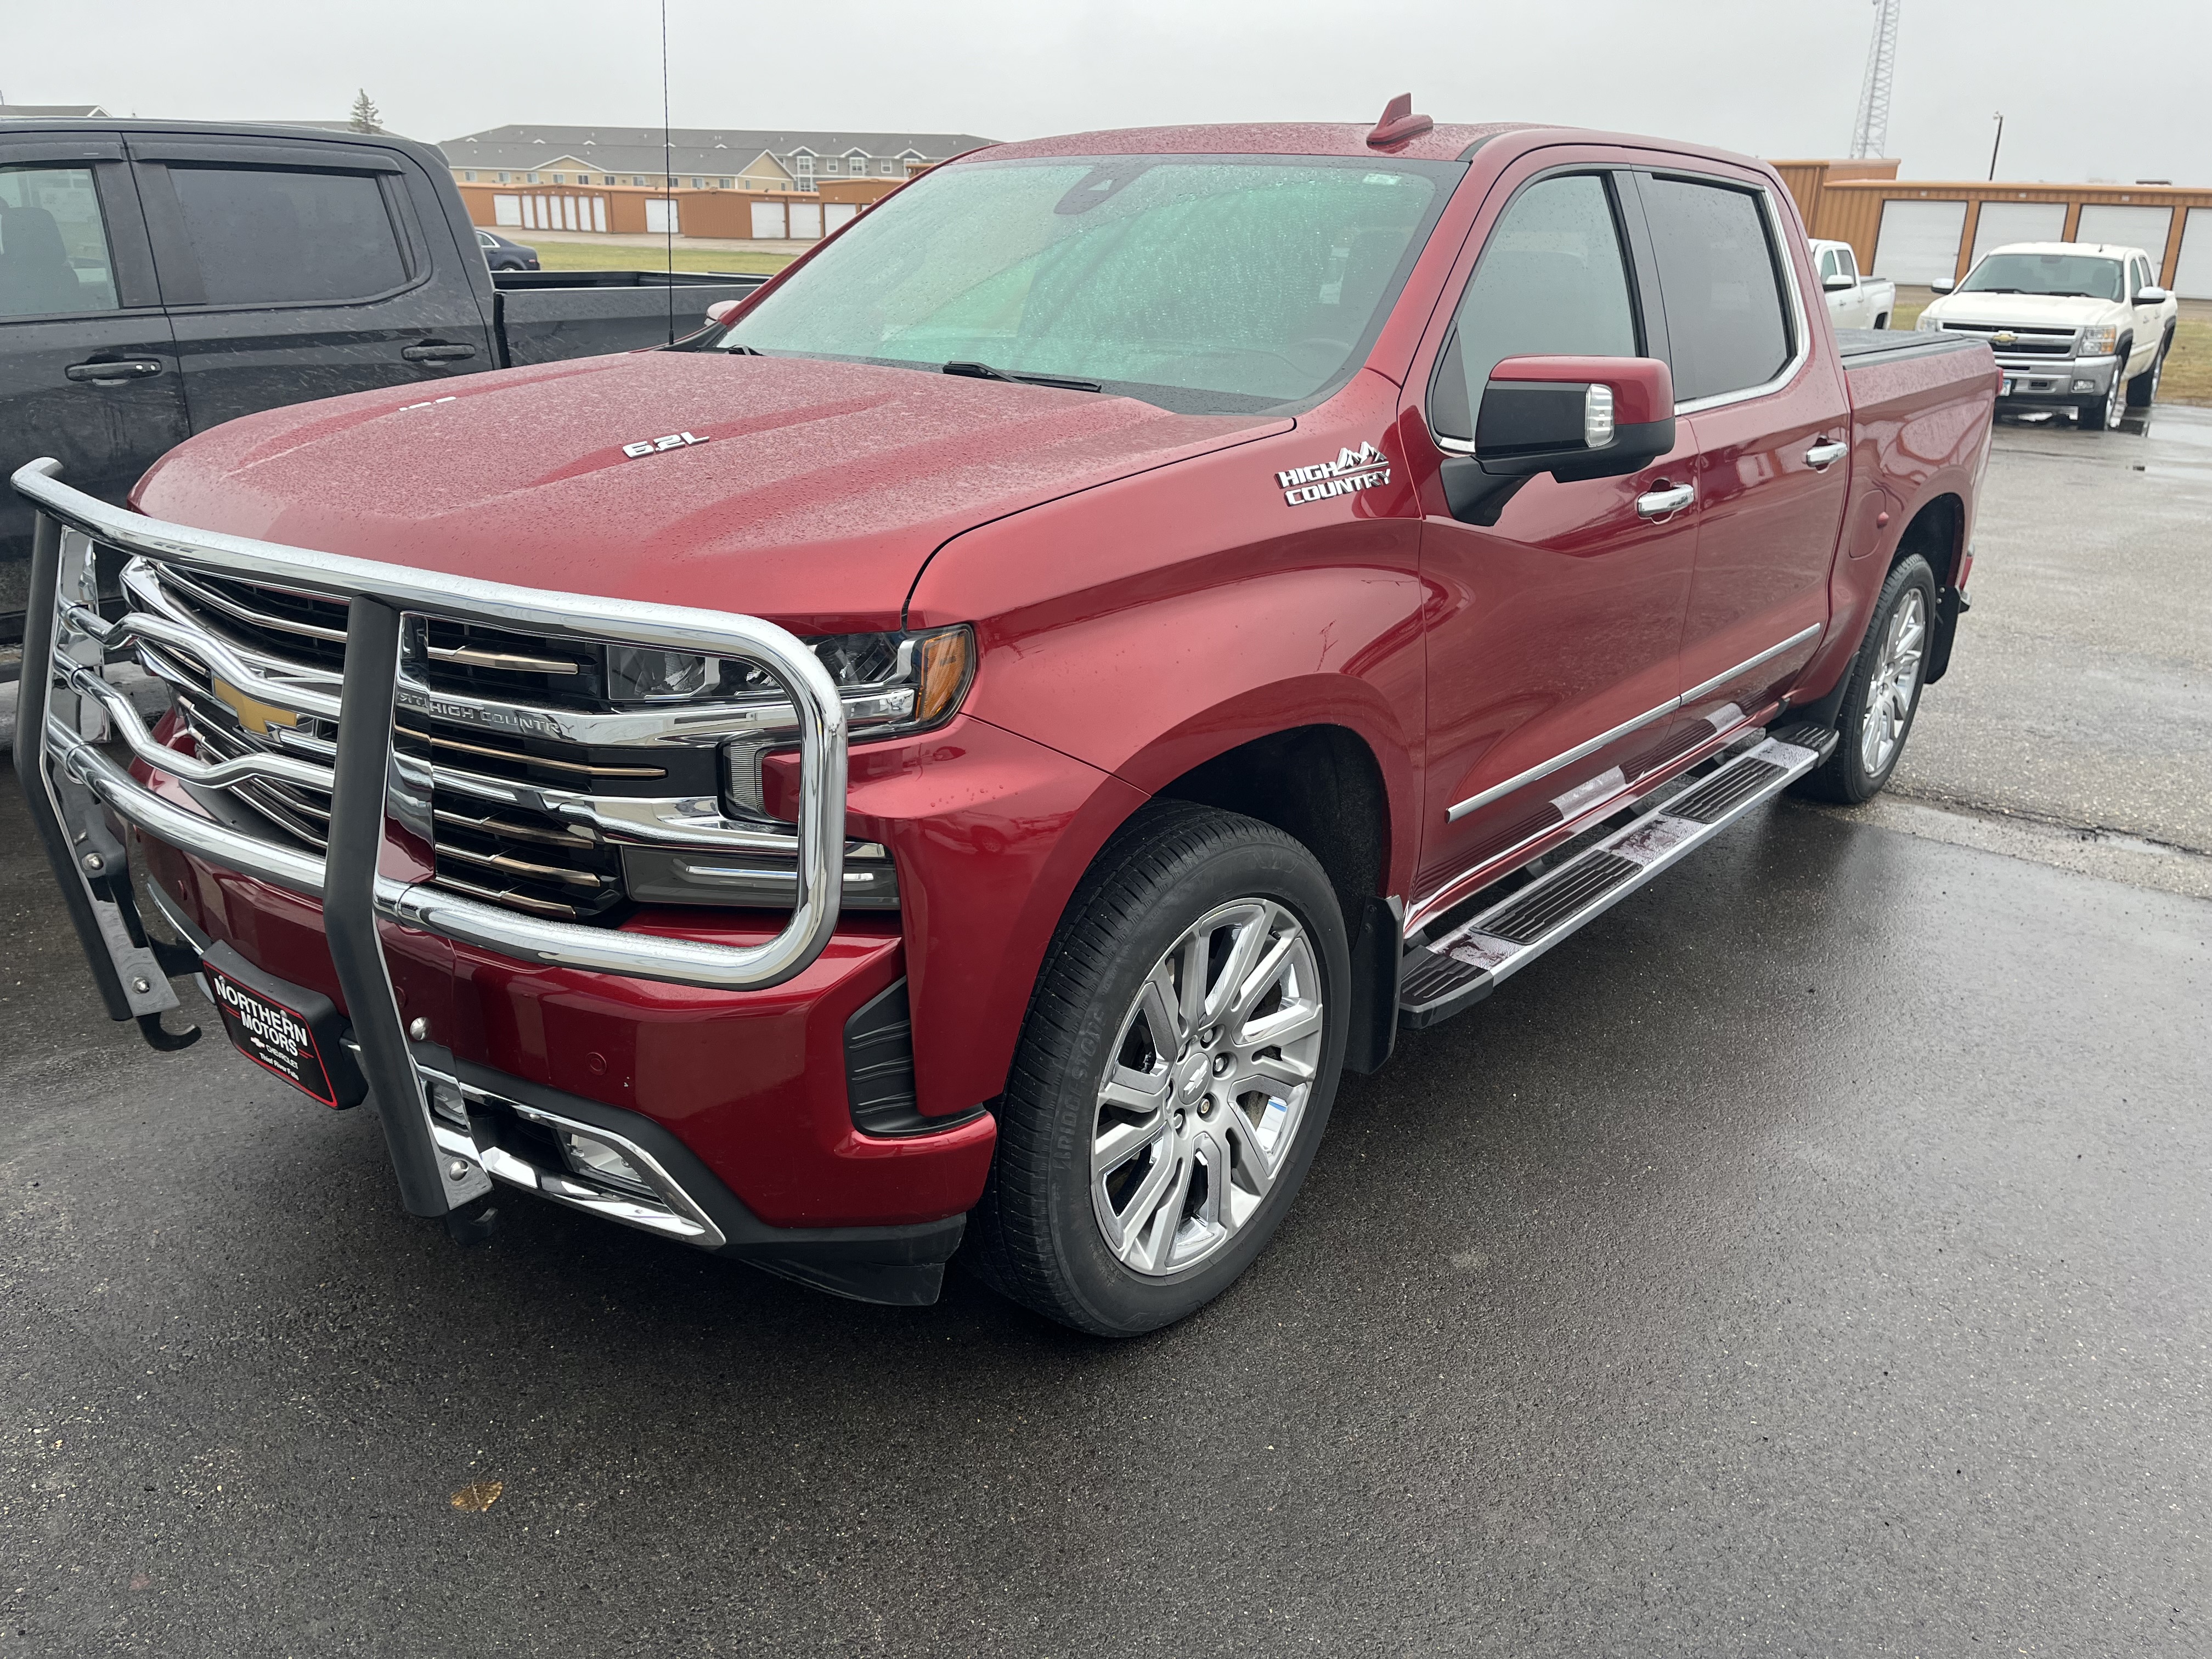 Used 2019 Chevrolet Silverado 1500 High Country with VIN 3GCUYHEL9KG132958 for sale in Thief River Falls, Minnesota